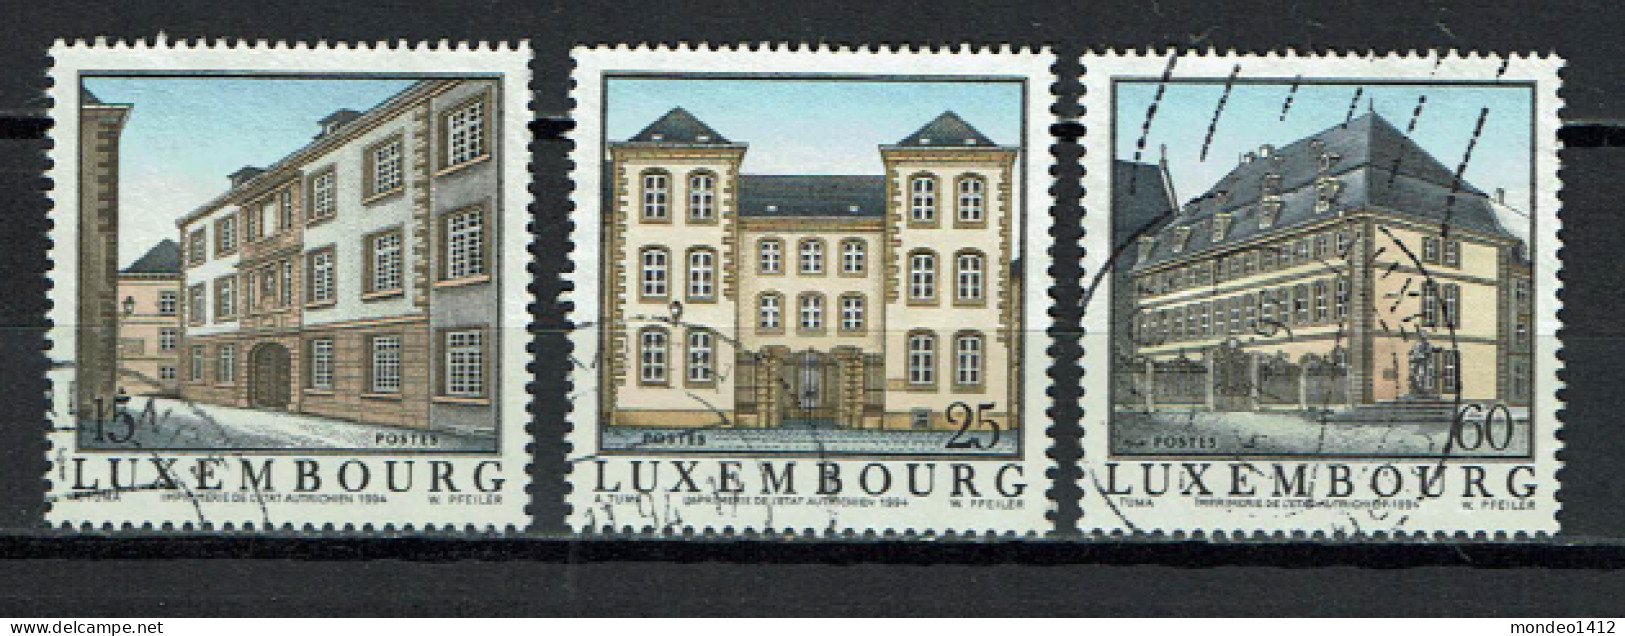 Luxembourg 1994 - YT 1300/1302 - Former Refugees In Luxembourg, Anciens Refuges - Gebruikt